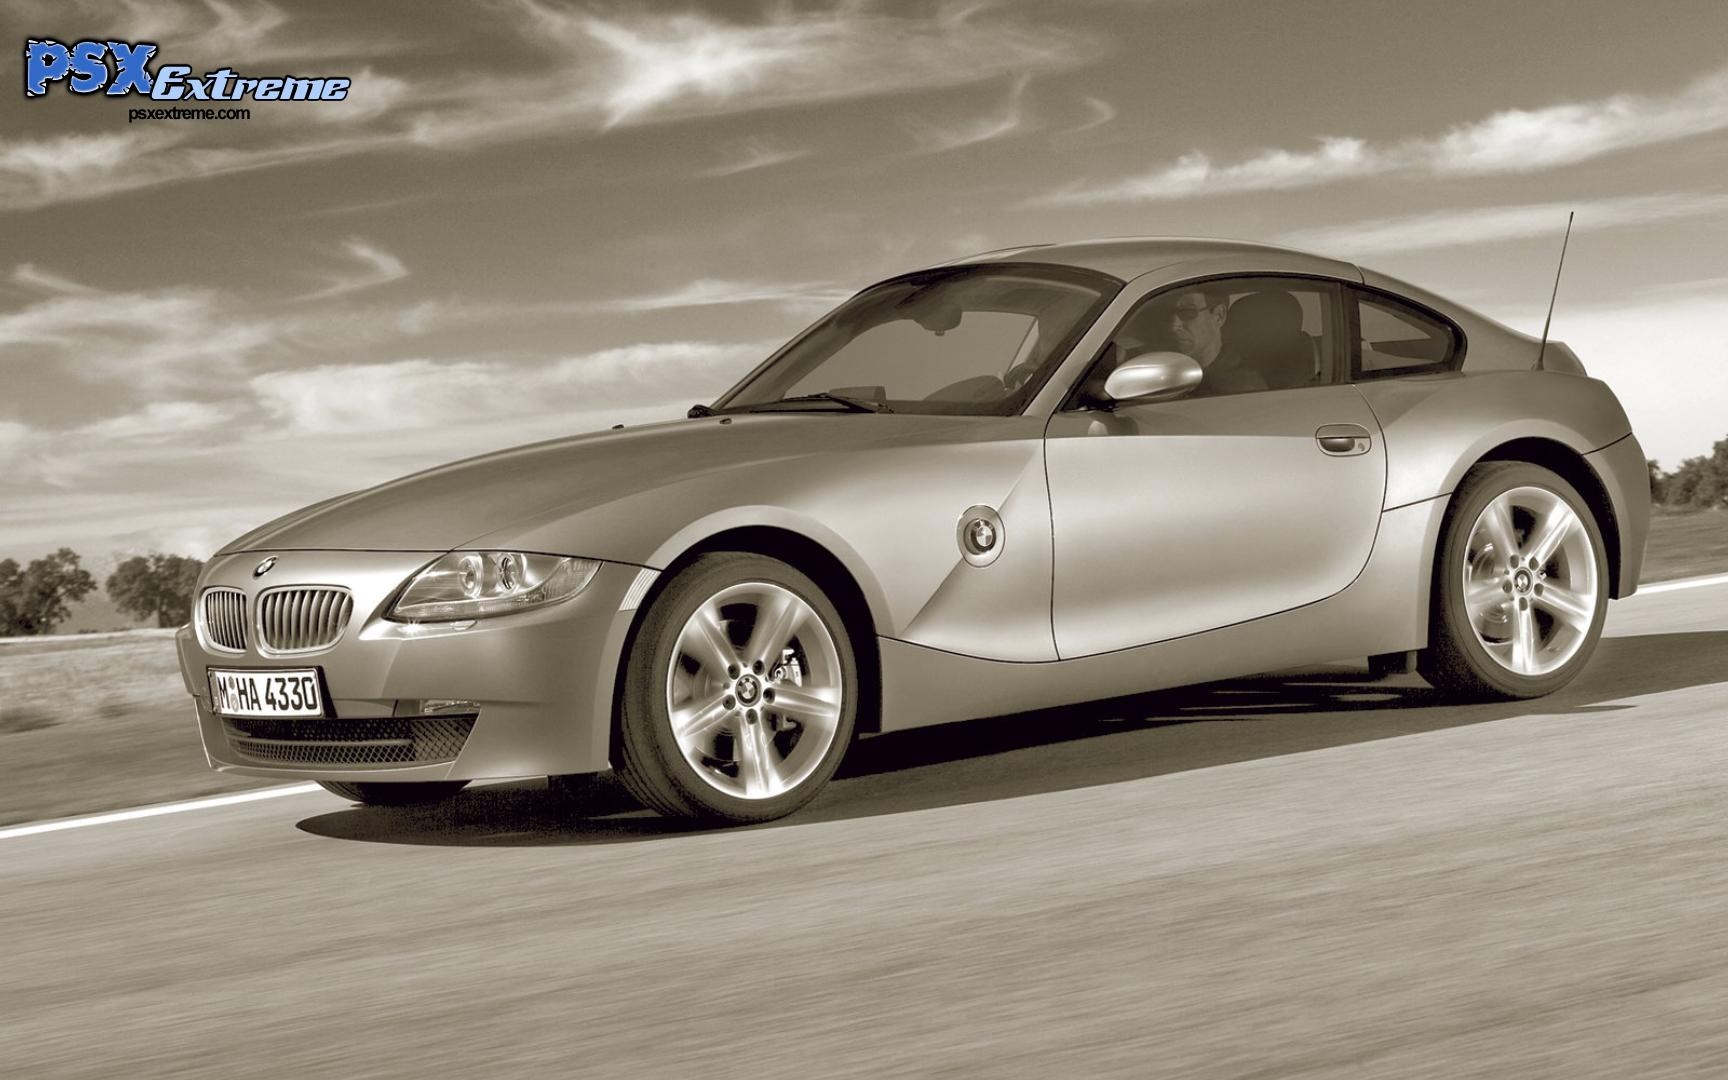 This is a BMW Z4 Coupe wallpaper. This BMW Z4 Coupe background can be used